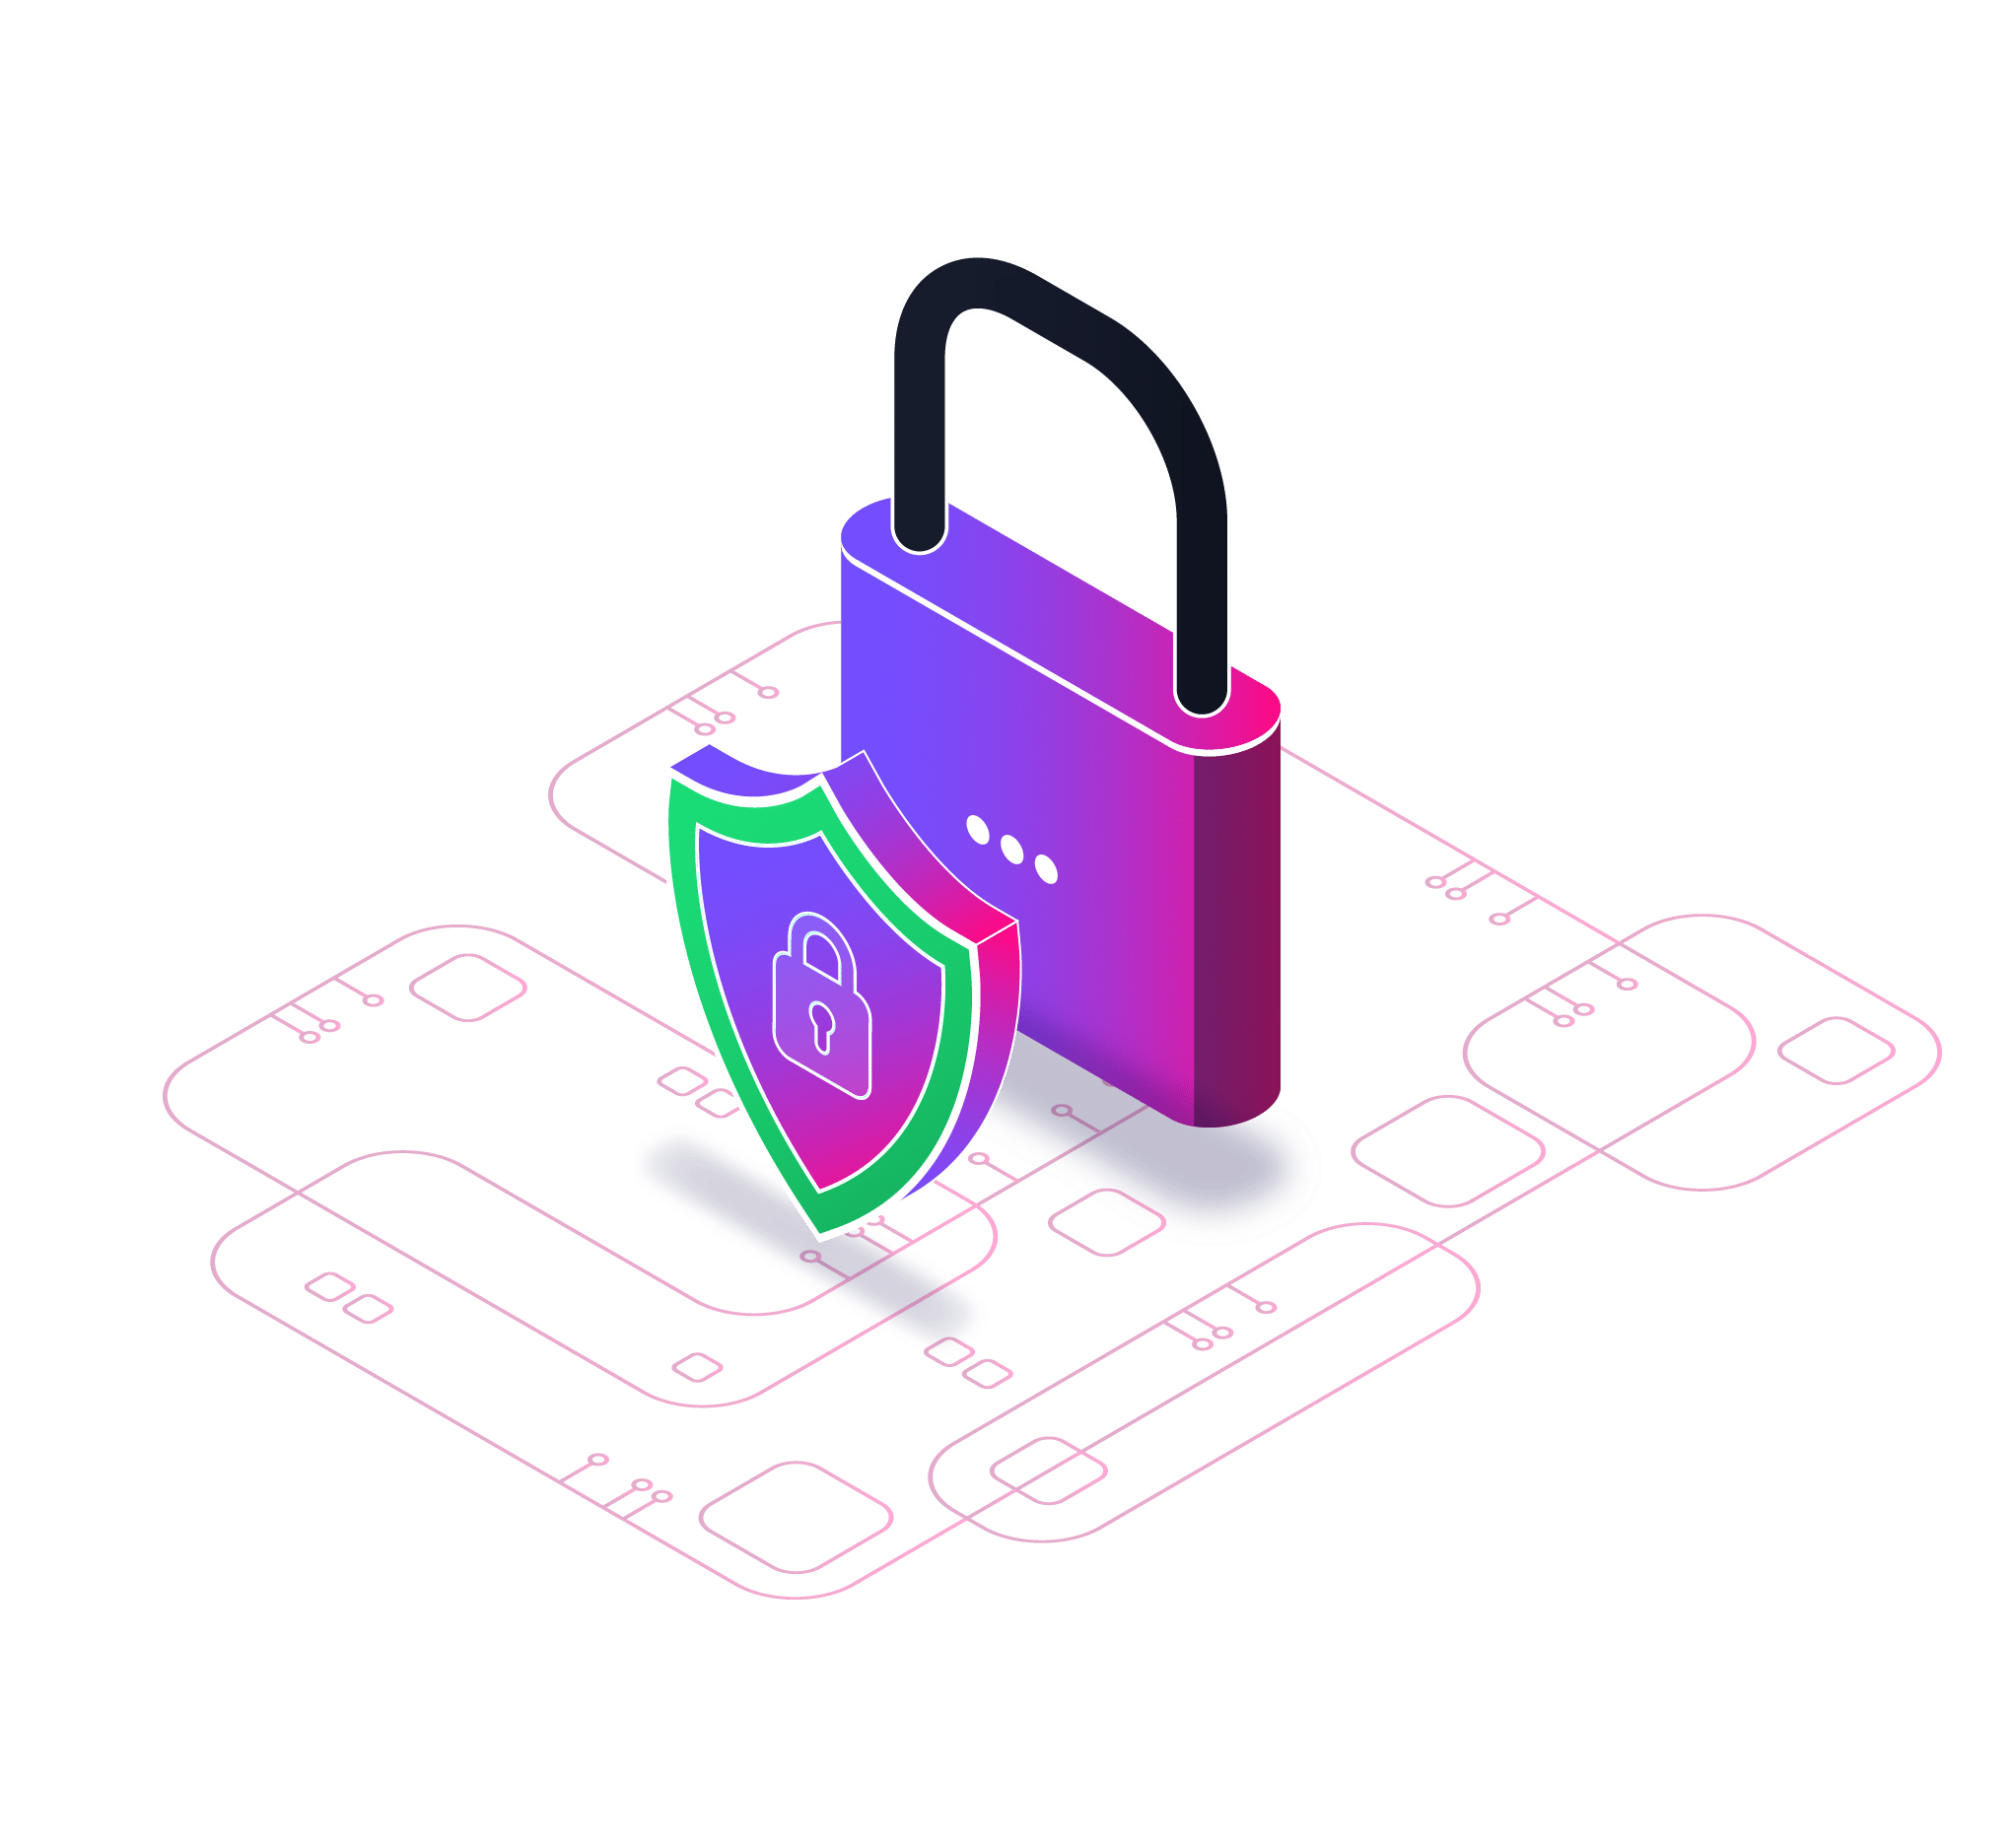 hyper-core-page-hyper-core-benefits-illustrations_Robust Security